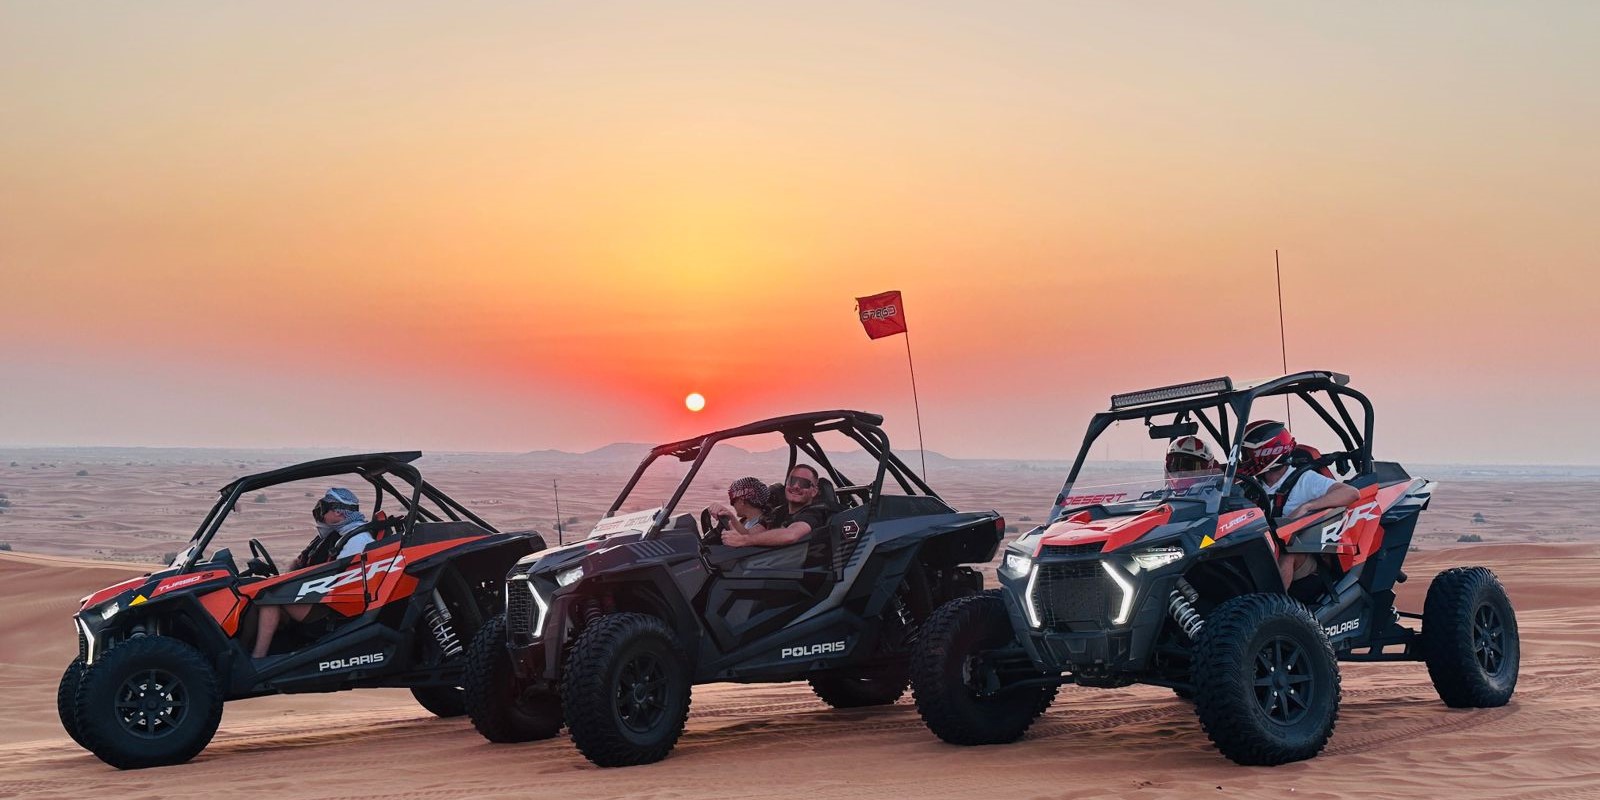 Do I Need a License to Rent a Dune Buggy in Dubai?